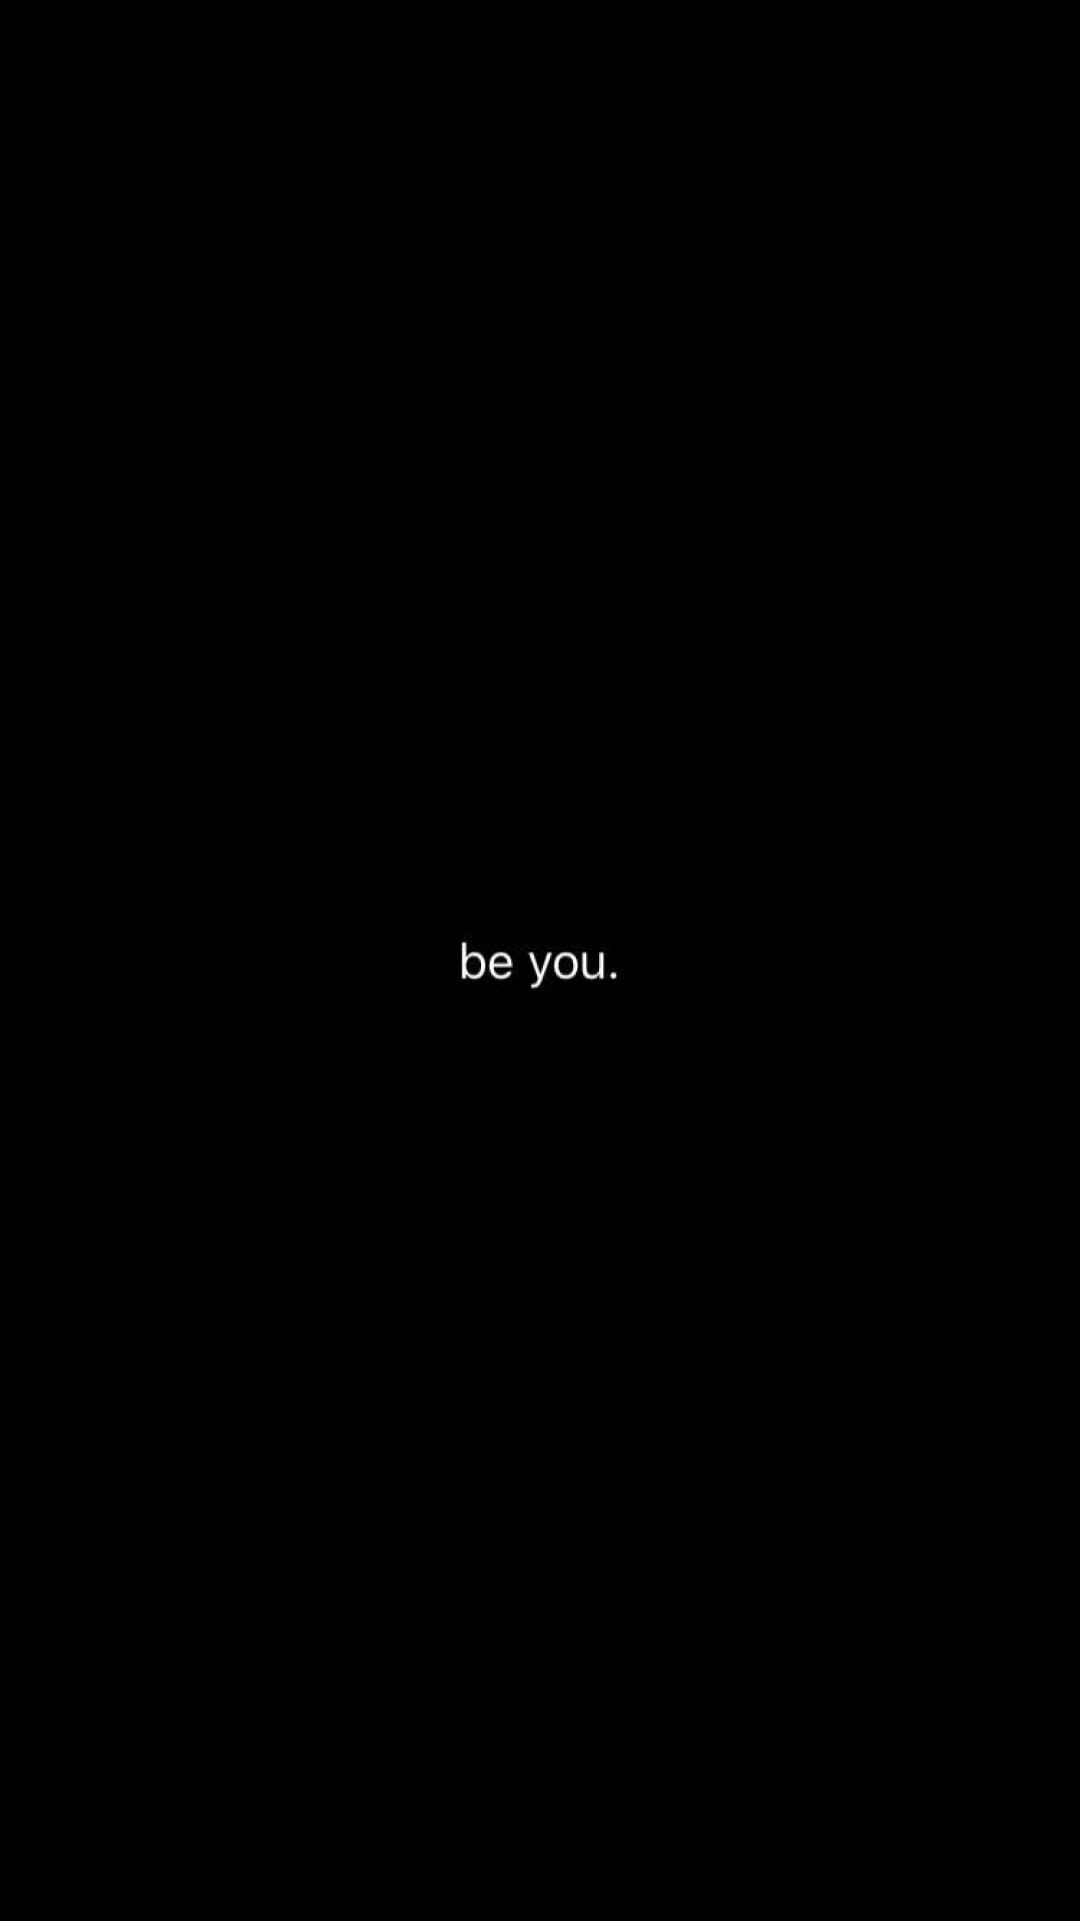 Aesthetic Black Quotes, iPhone, Desktop HD Background / Wallpaper (1080p, 4k) HD Wallpaper (Desktop Background / Android / iPhone) (1080p, 4k) (1080x1921)